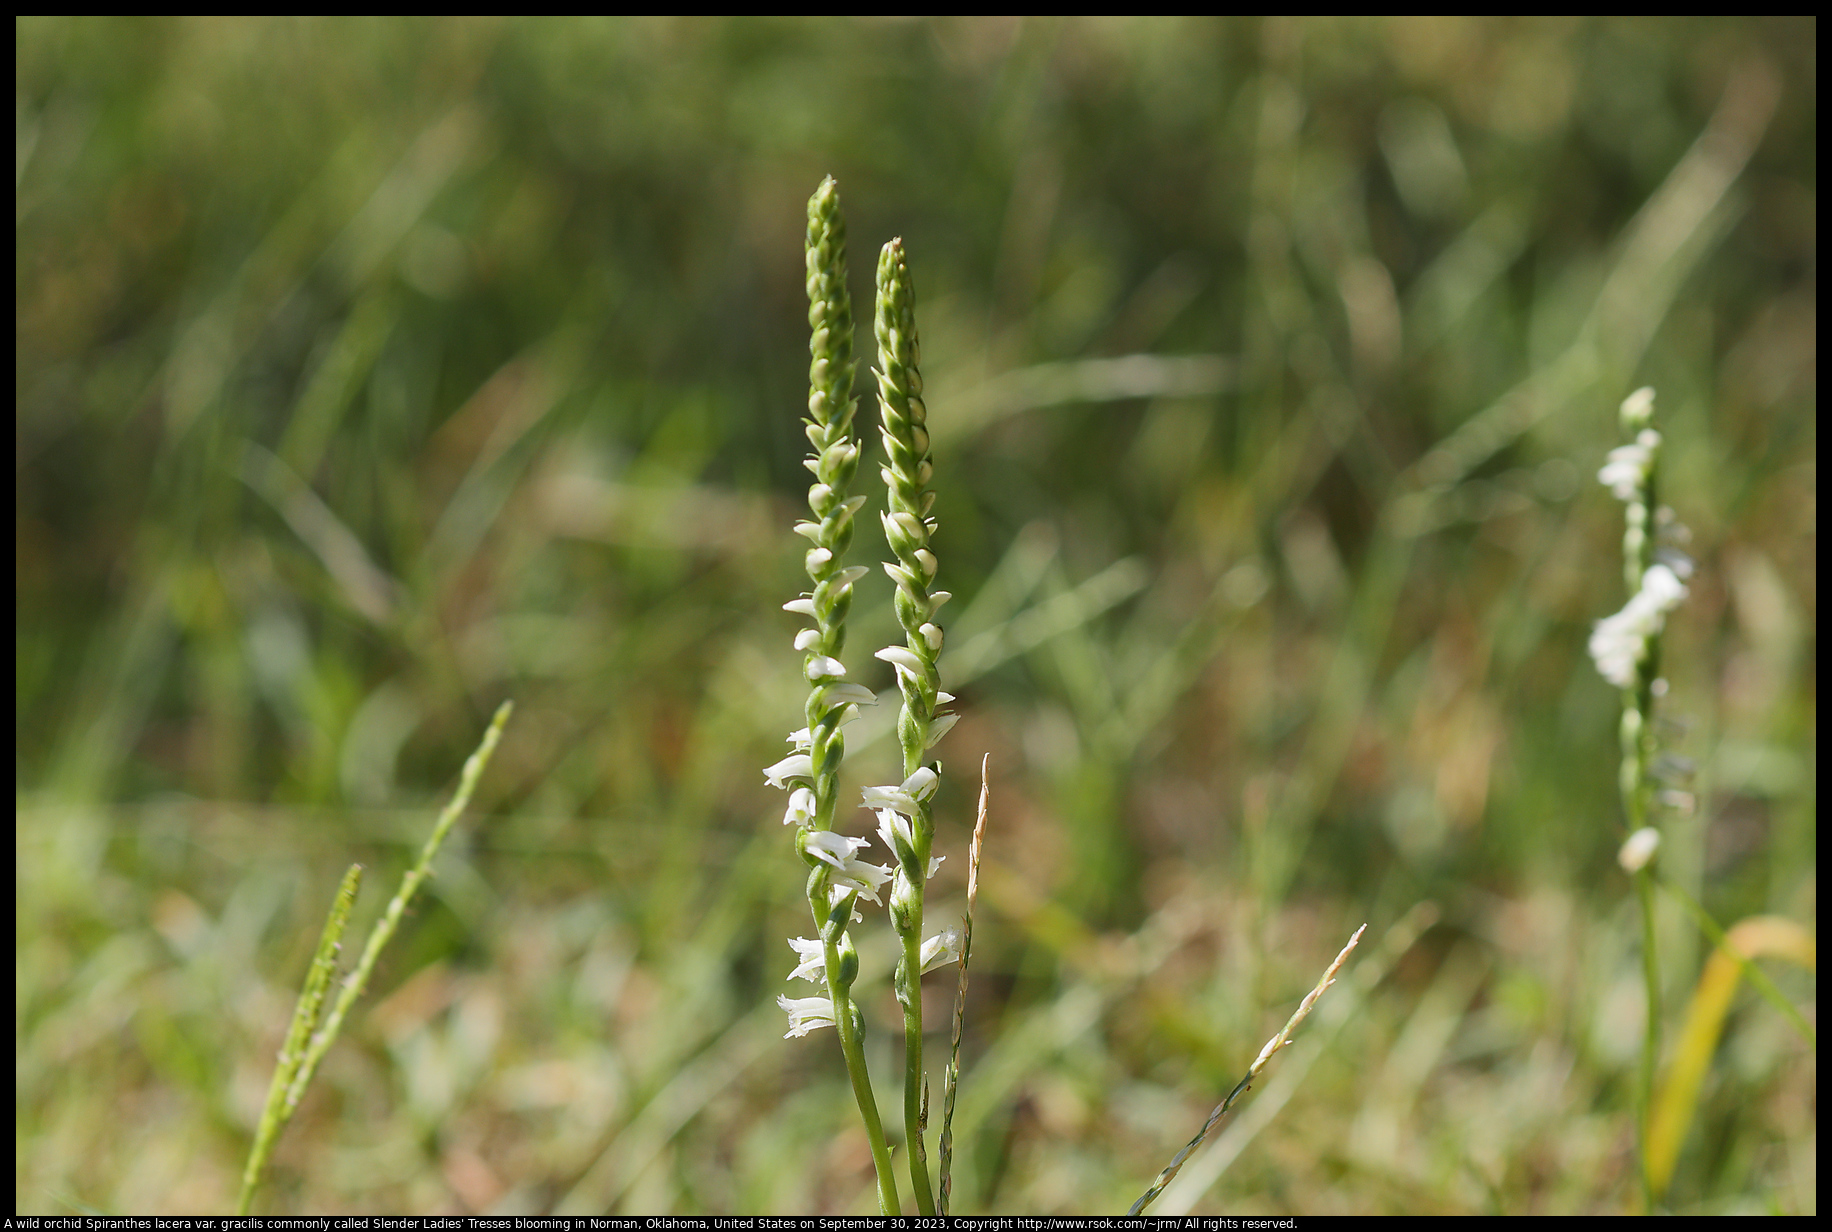 A wild orchid Spiranthes lacera var. gracilis commonly called Slender Ladies' Tresses blooming in Norman, Oklahoma, United States, on September 30, 2023